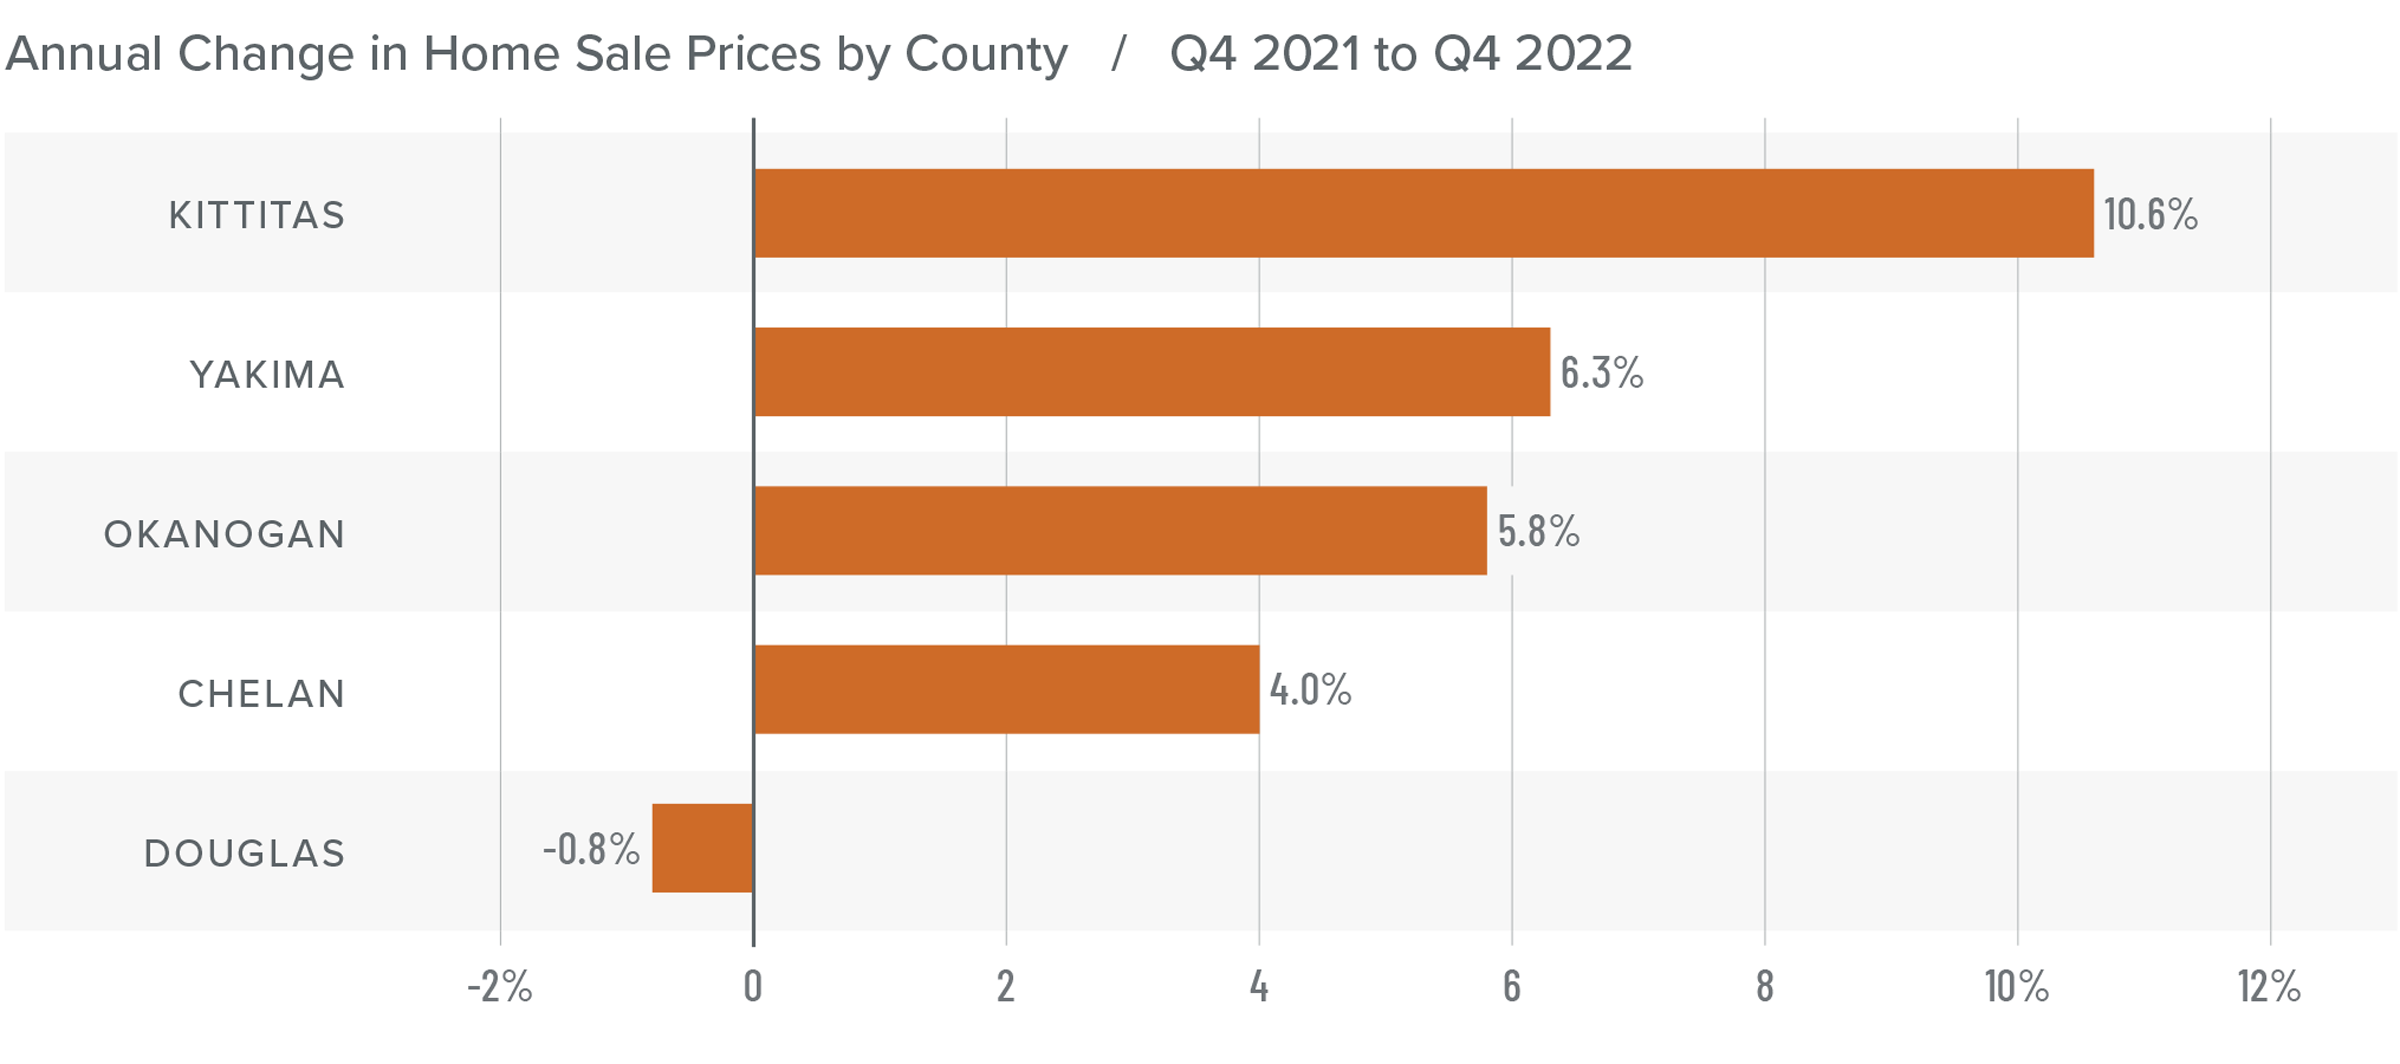 A bar graph showing the annual change in home sale prices for various counties in Central Washington from Q4 2021 to Q4 2022. Kittitas County tops the list at 10.6%, followed by Yakima at 6.3%, Okanogan at 5.8%, Chelan at 4%, and Douglas at -0.8%.